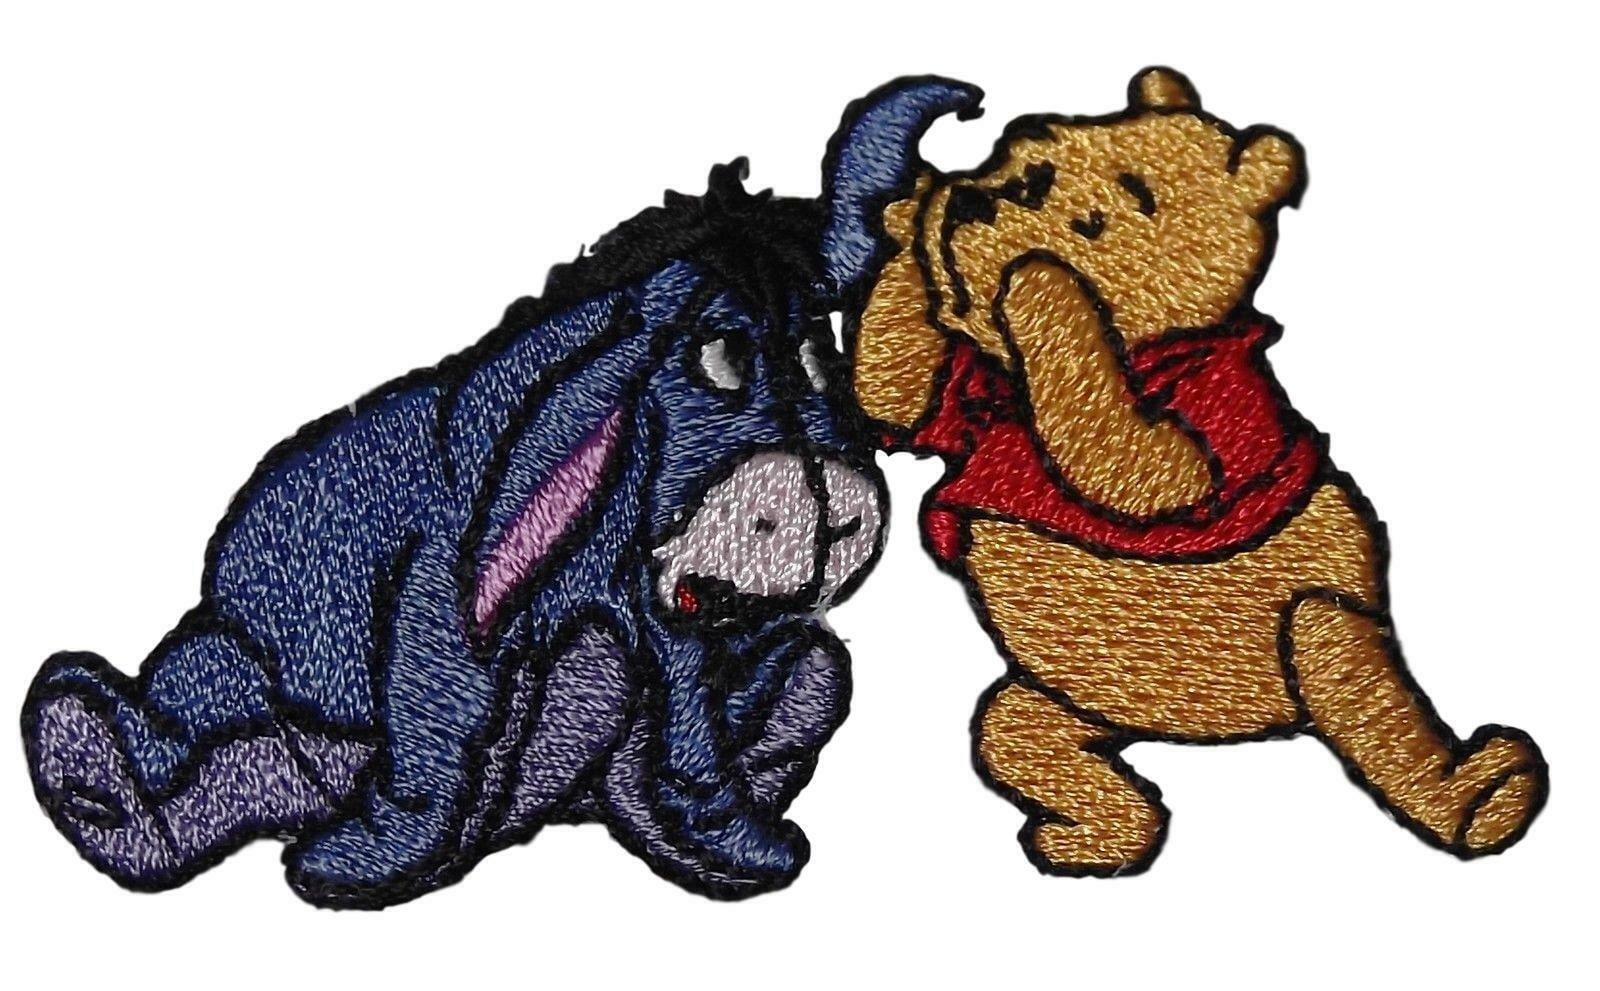 Winnie The Pooh And Eeyore Embroidered Patch 